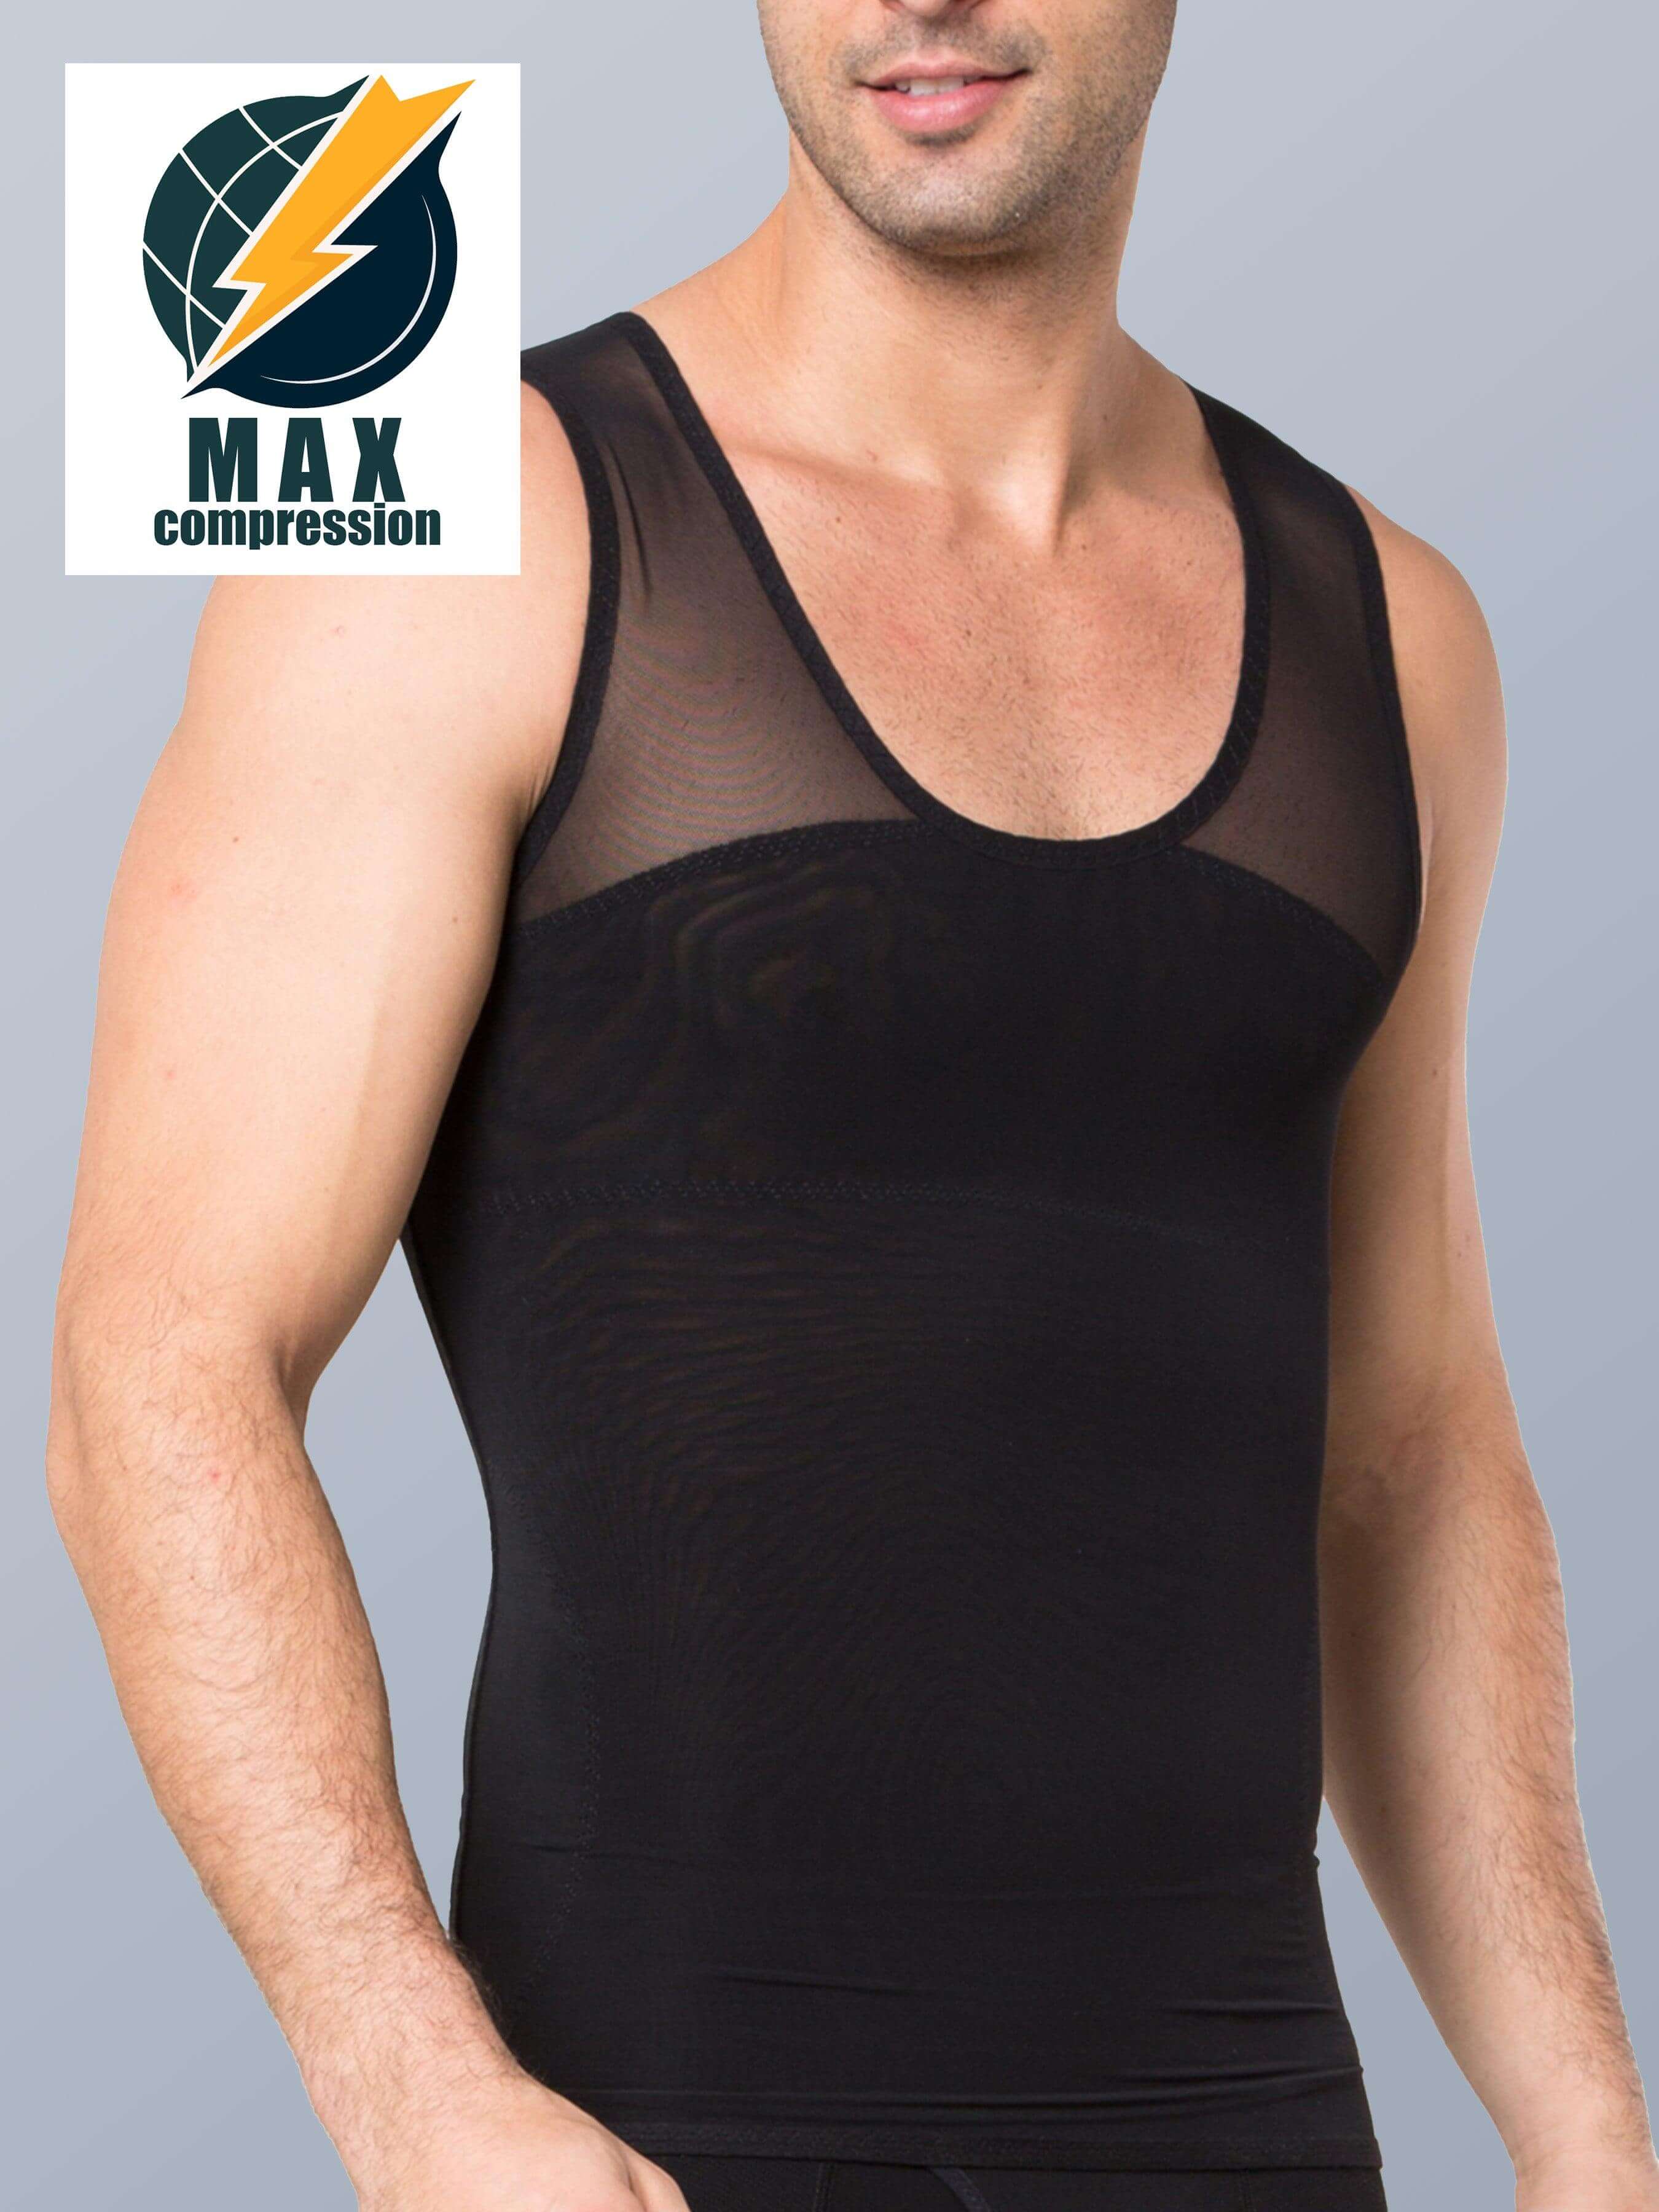 Expert tips for squeezing the most out of your mens compression shirt